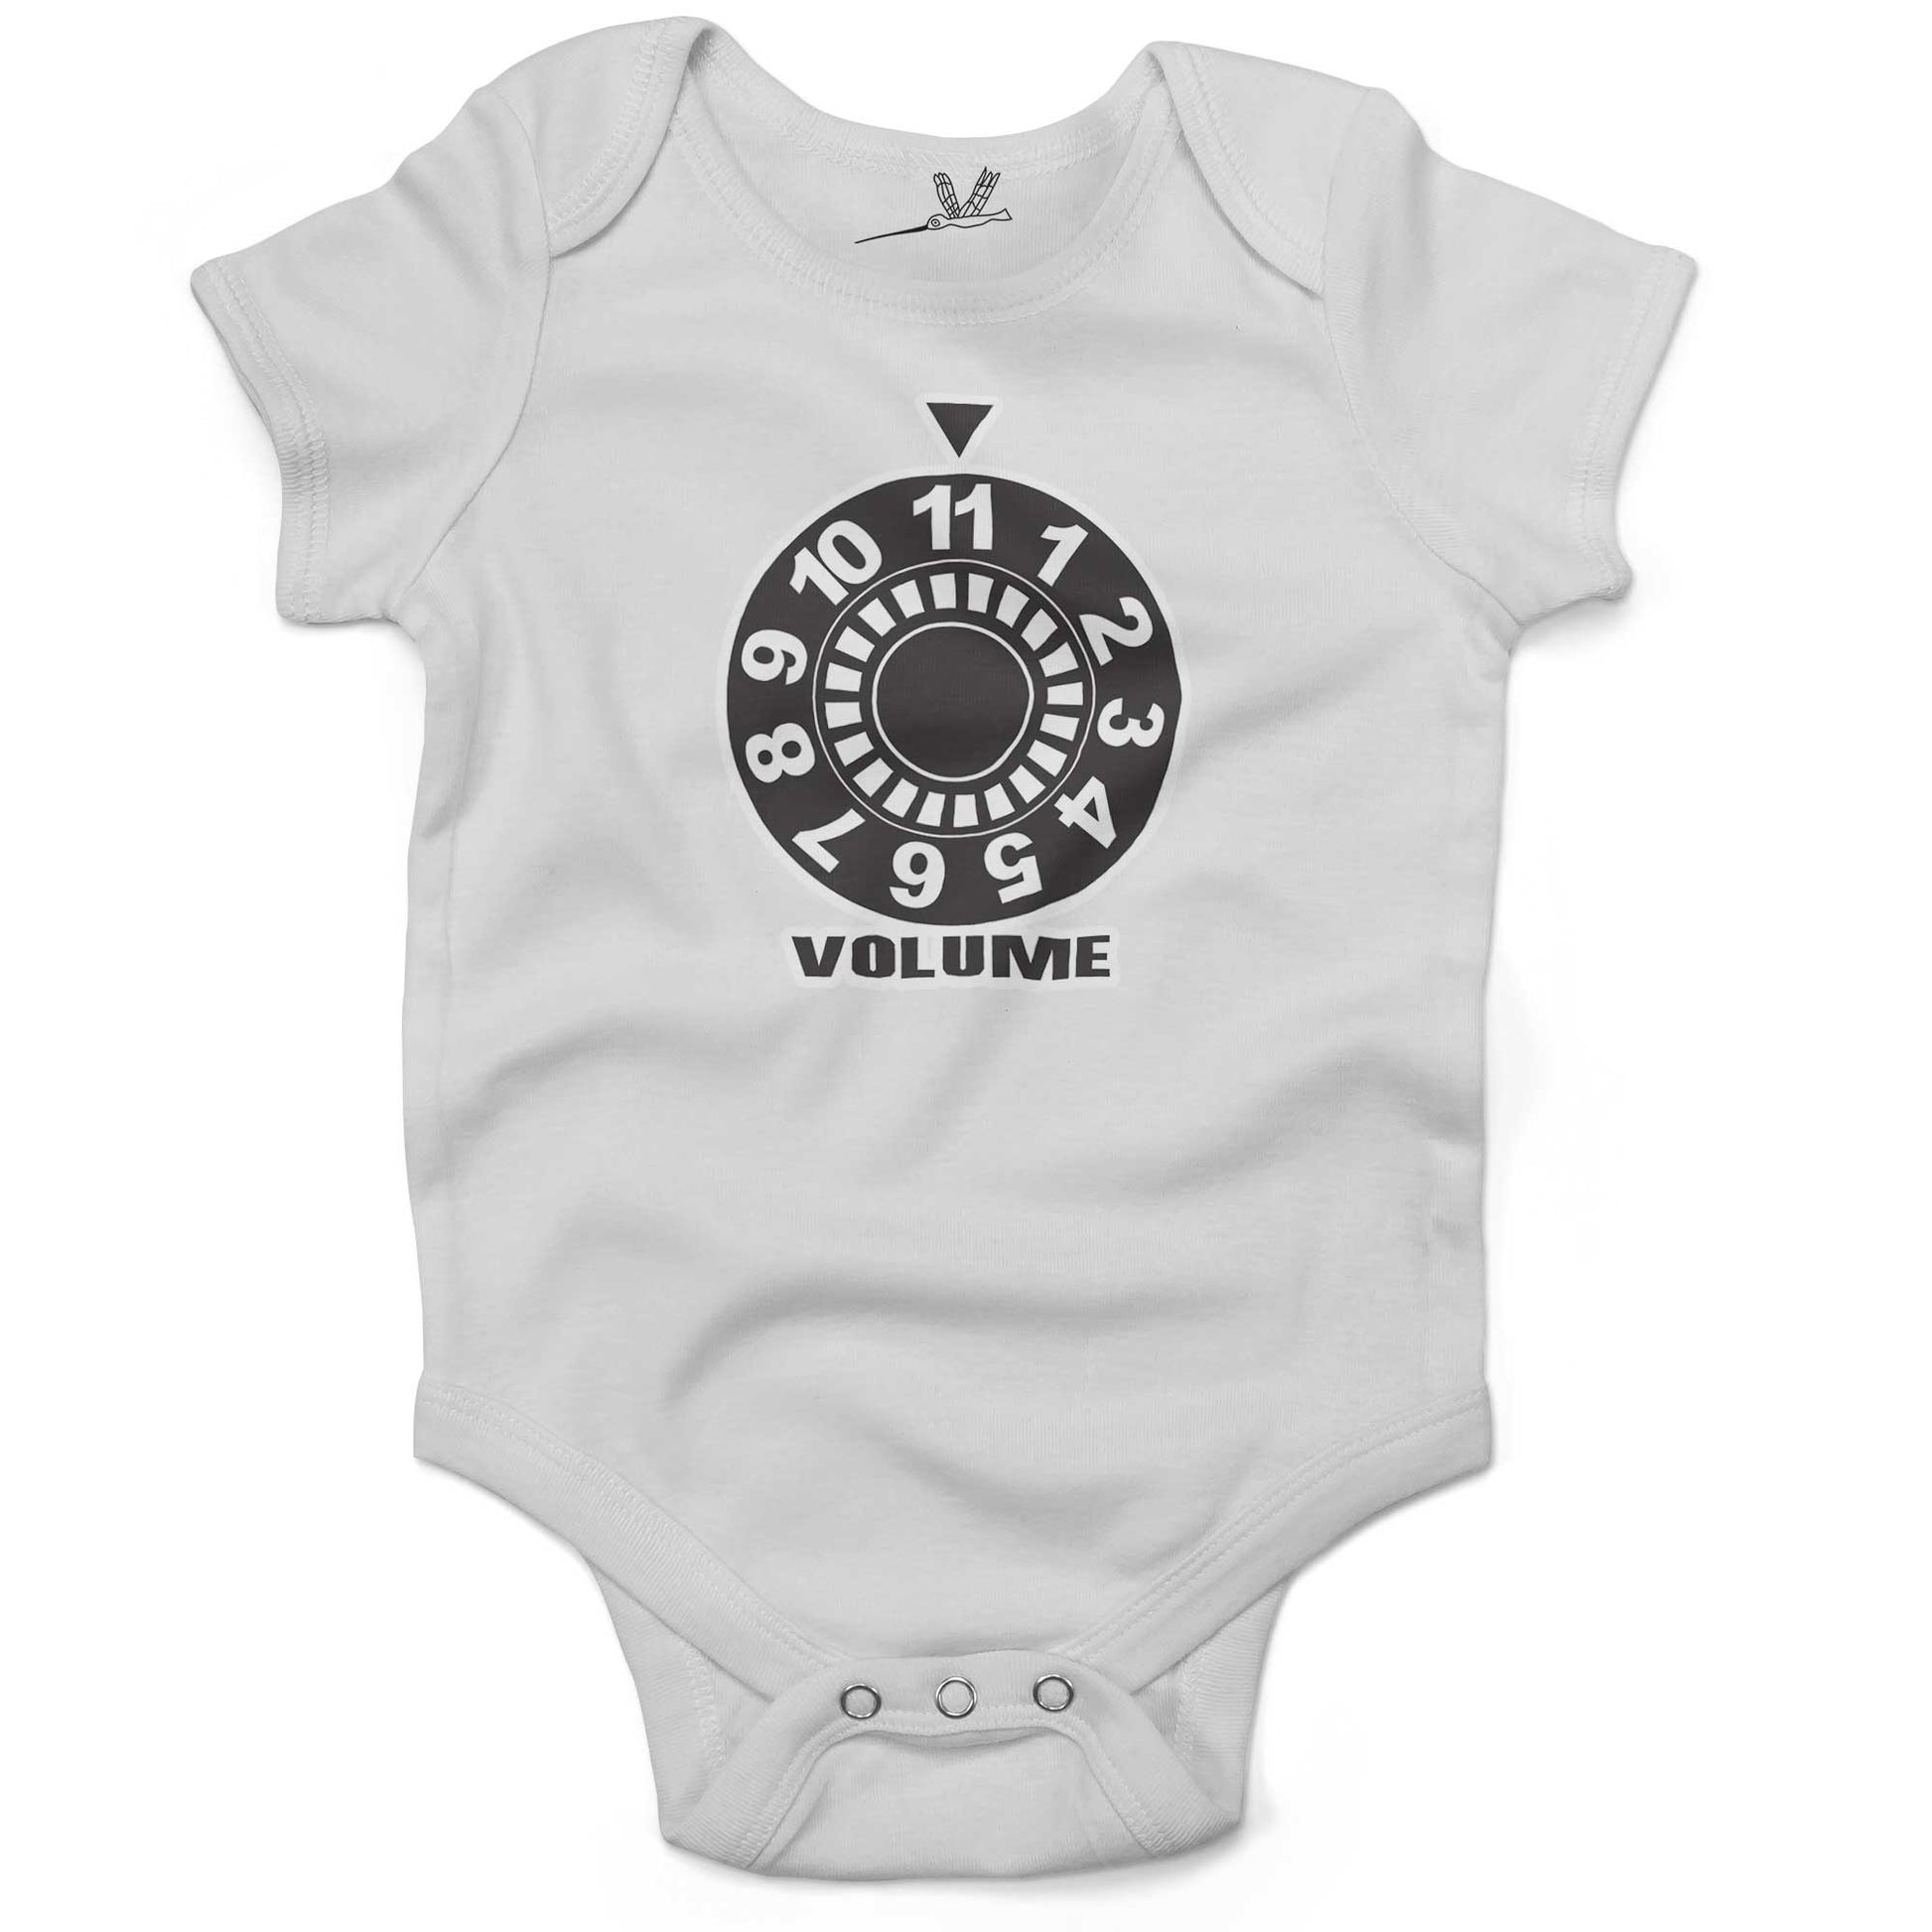 Turn It Up To 11 Infant Bodysuit or Raglan Baby Tee-White-3-6 months